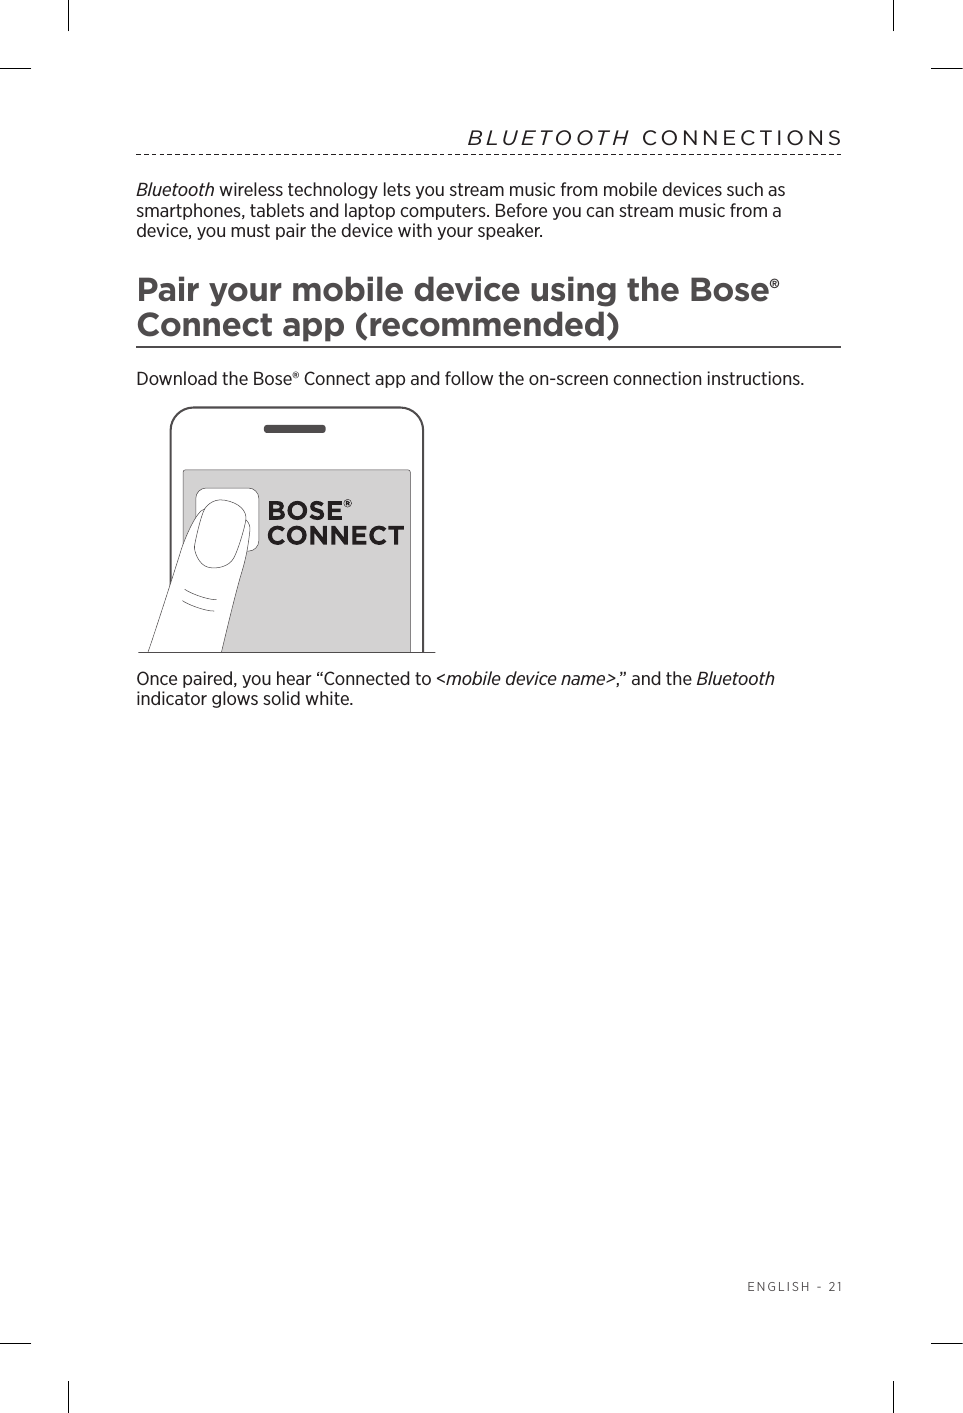  ENGLISH - 21BLUETOOTH CONNECTIONS Bluetooth wireless technology lets you stream music from mobile devices such as  smartphones, tablets and laptop computers. Before you can stream music from a  device, you must pair the device with your speaker.Pair your mobile device using the Bose® Connect app (recommended)Download the Bose® Connect app and follow the on-screen connection instructions.Once paired, you hear “Connected to &lt;mobile device name&gt;,” and the Bluetooth  indicator glows solid white.